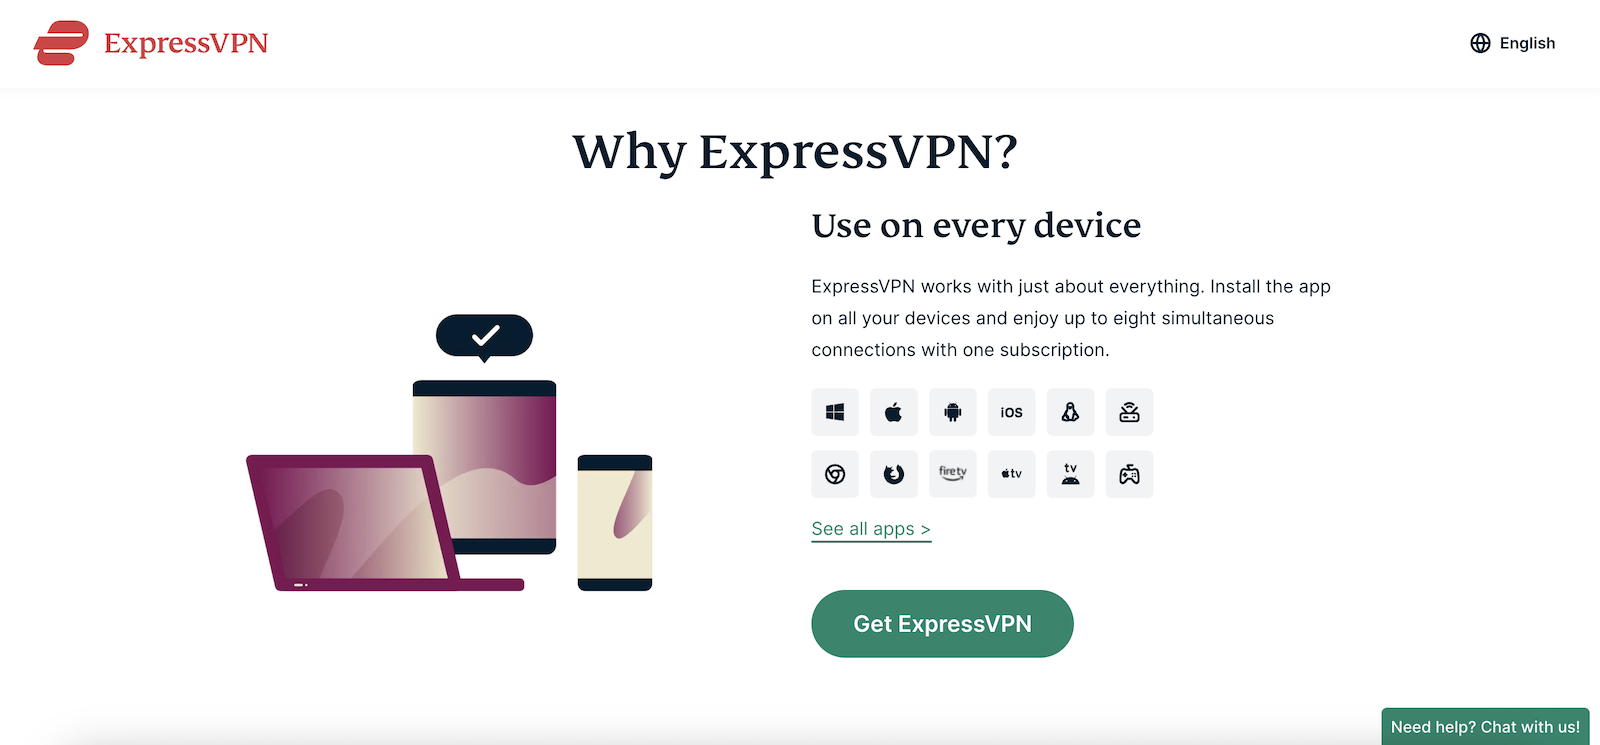 The landing page of the Express VPN Internet safe connection service company has many features.